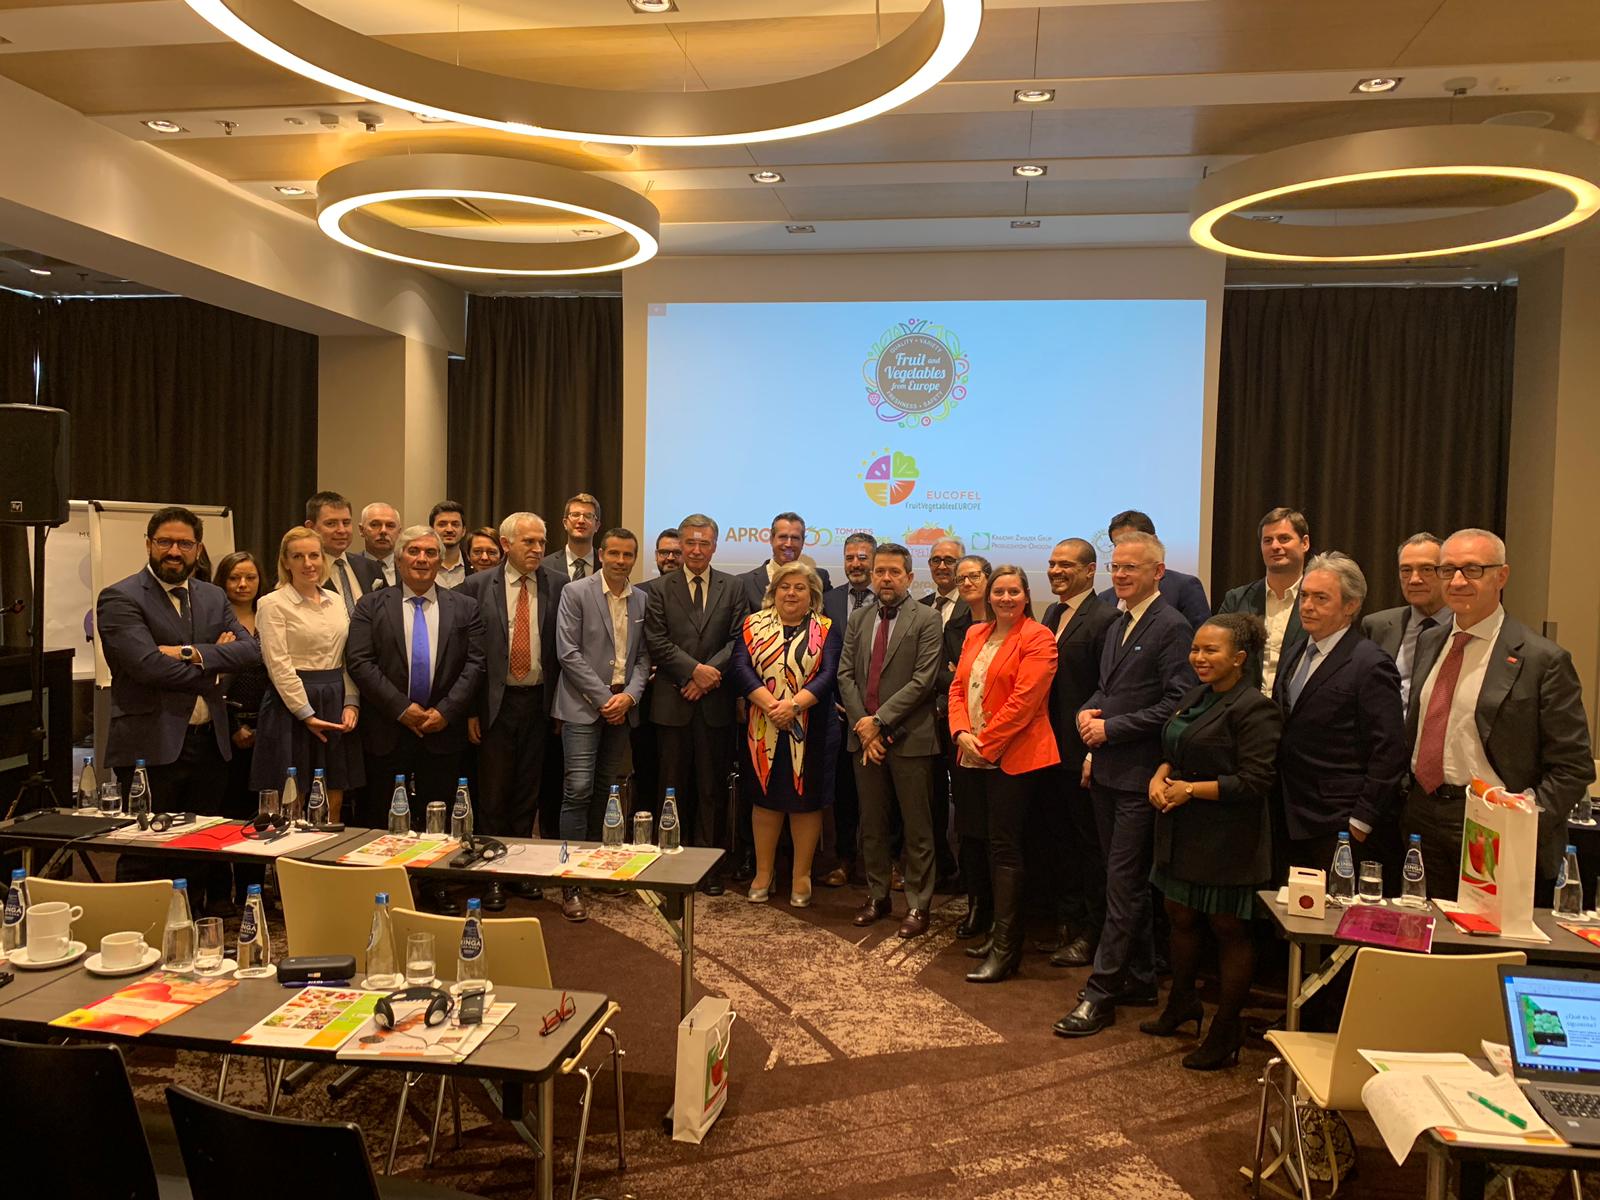 FruitVegetablesEUROPE debates trade opportunities at General Assembly & Event 2019